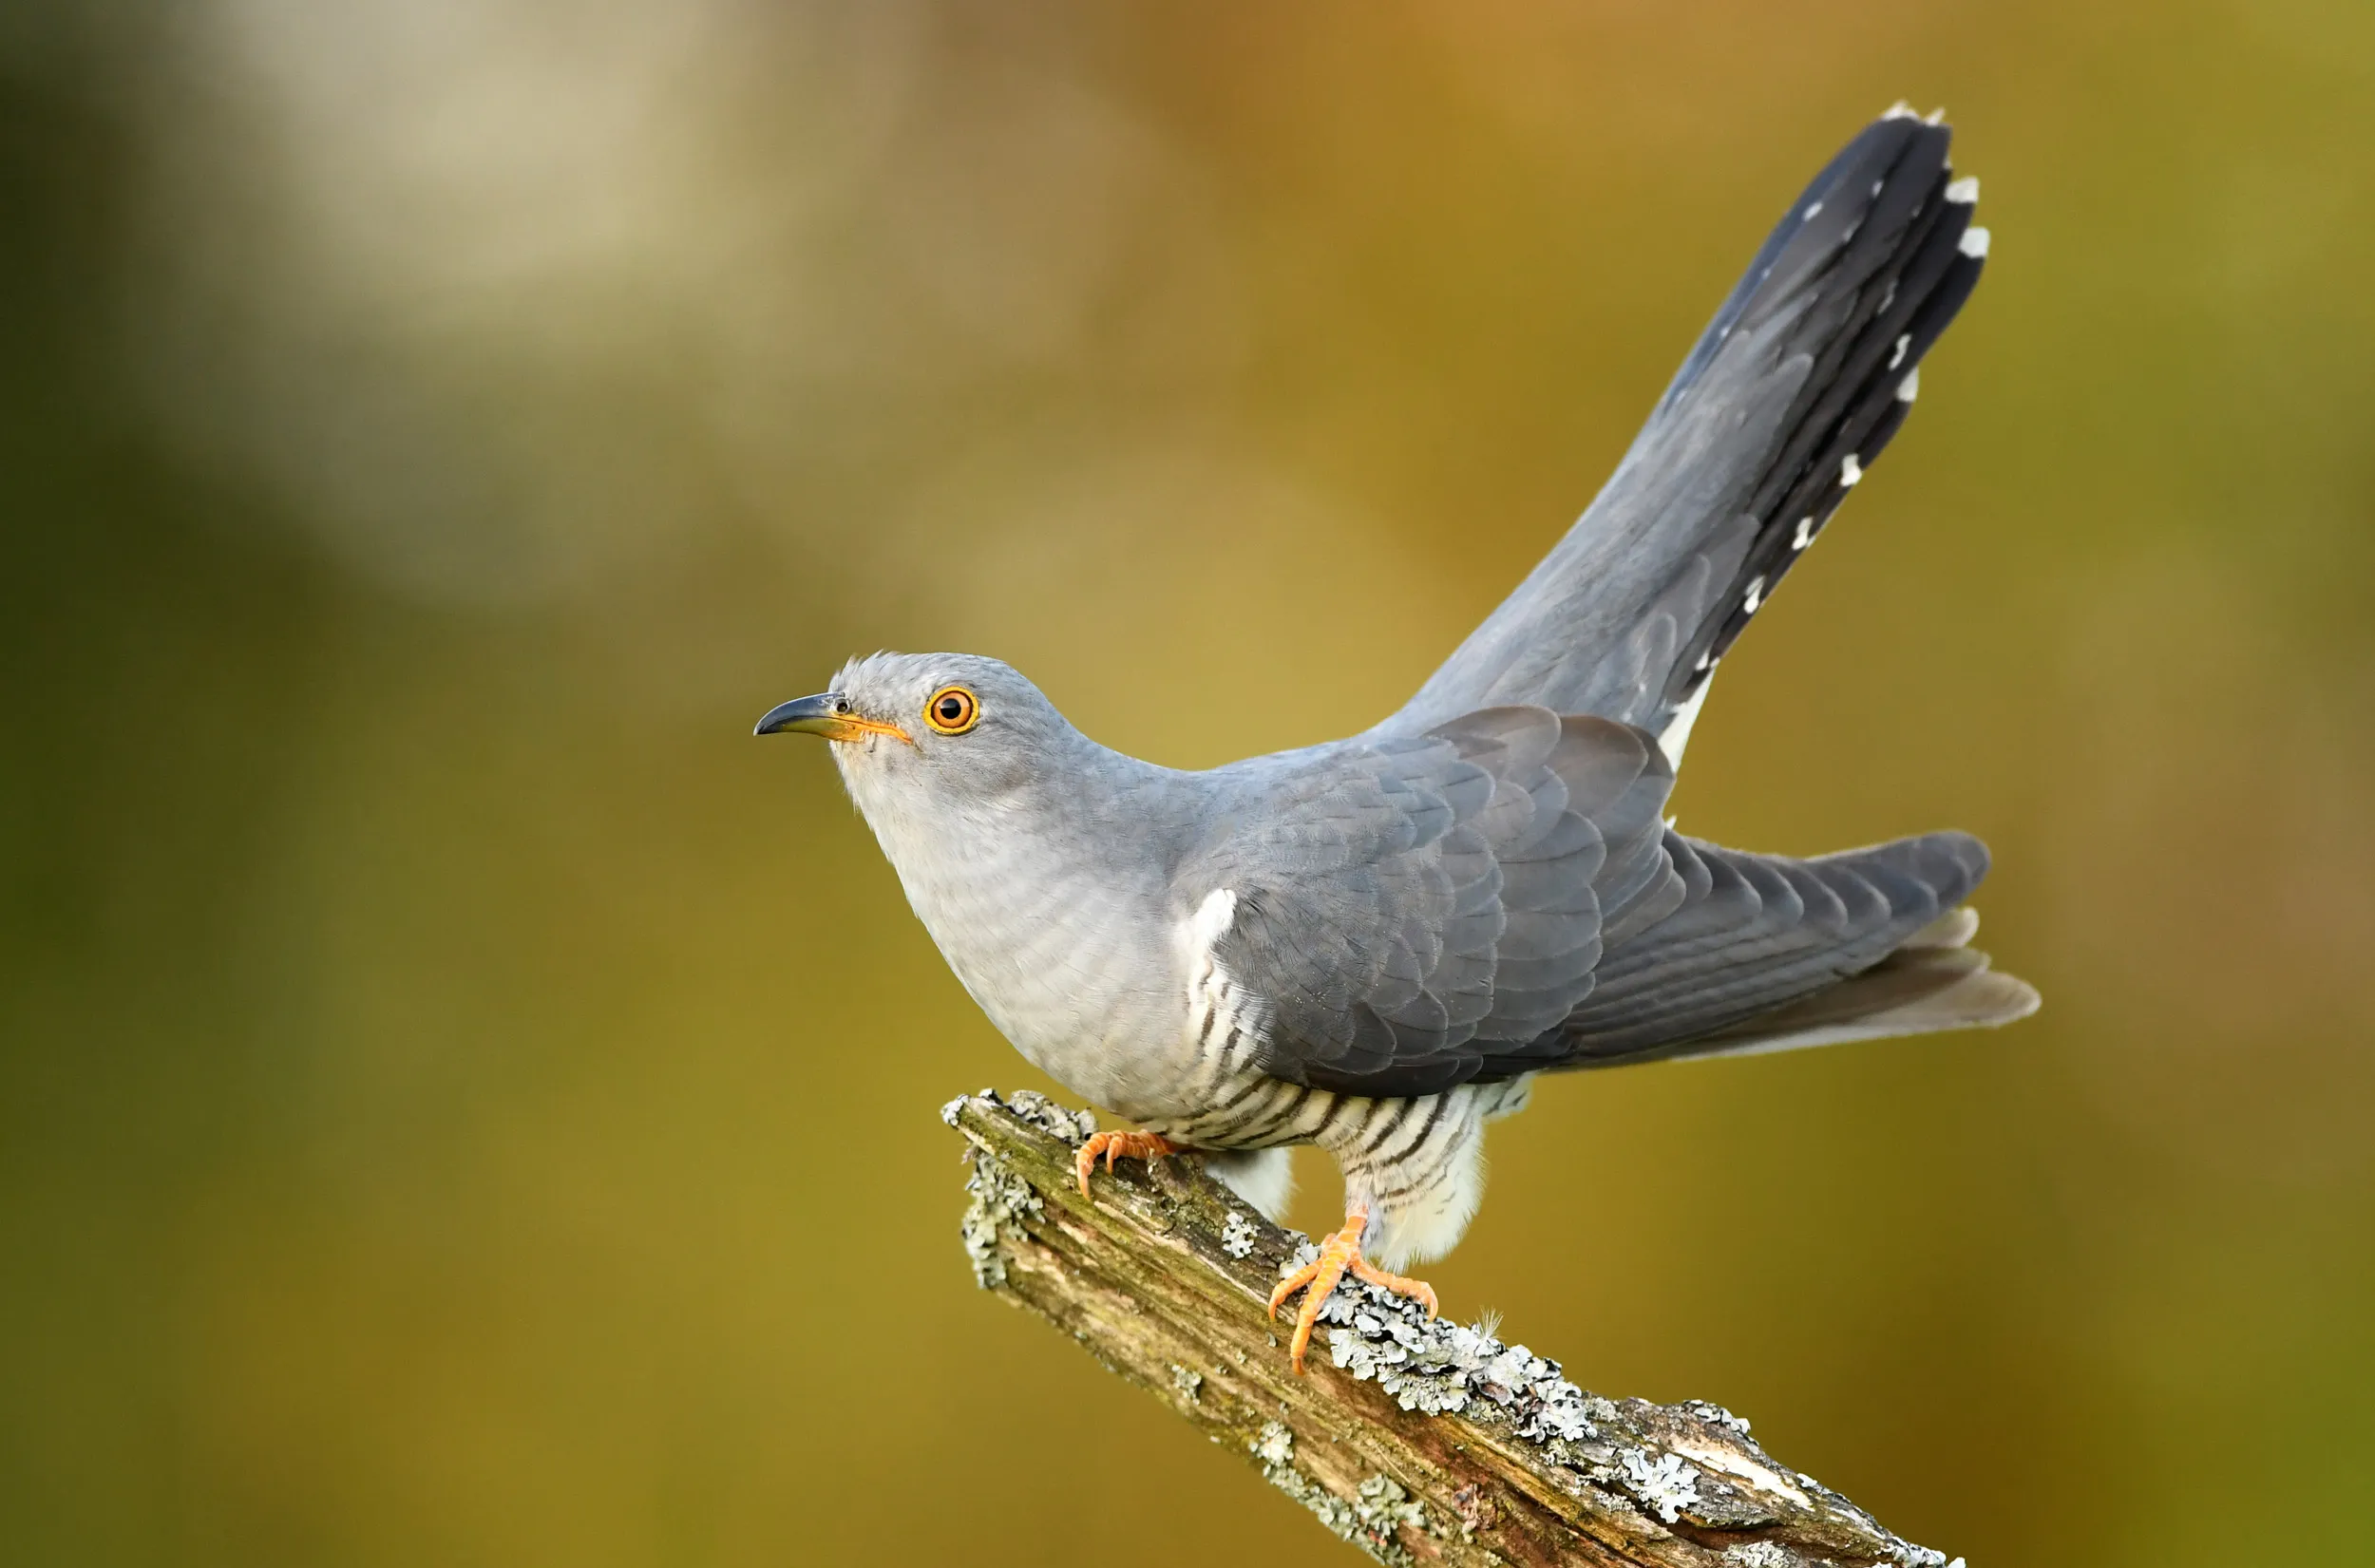 A lone Cuckoo perched singing on a branch.